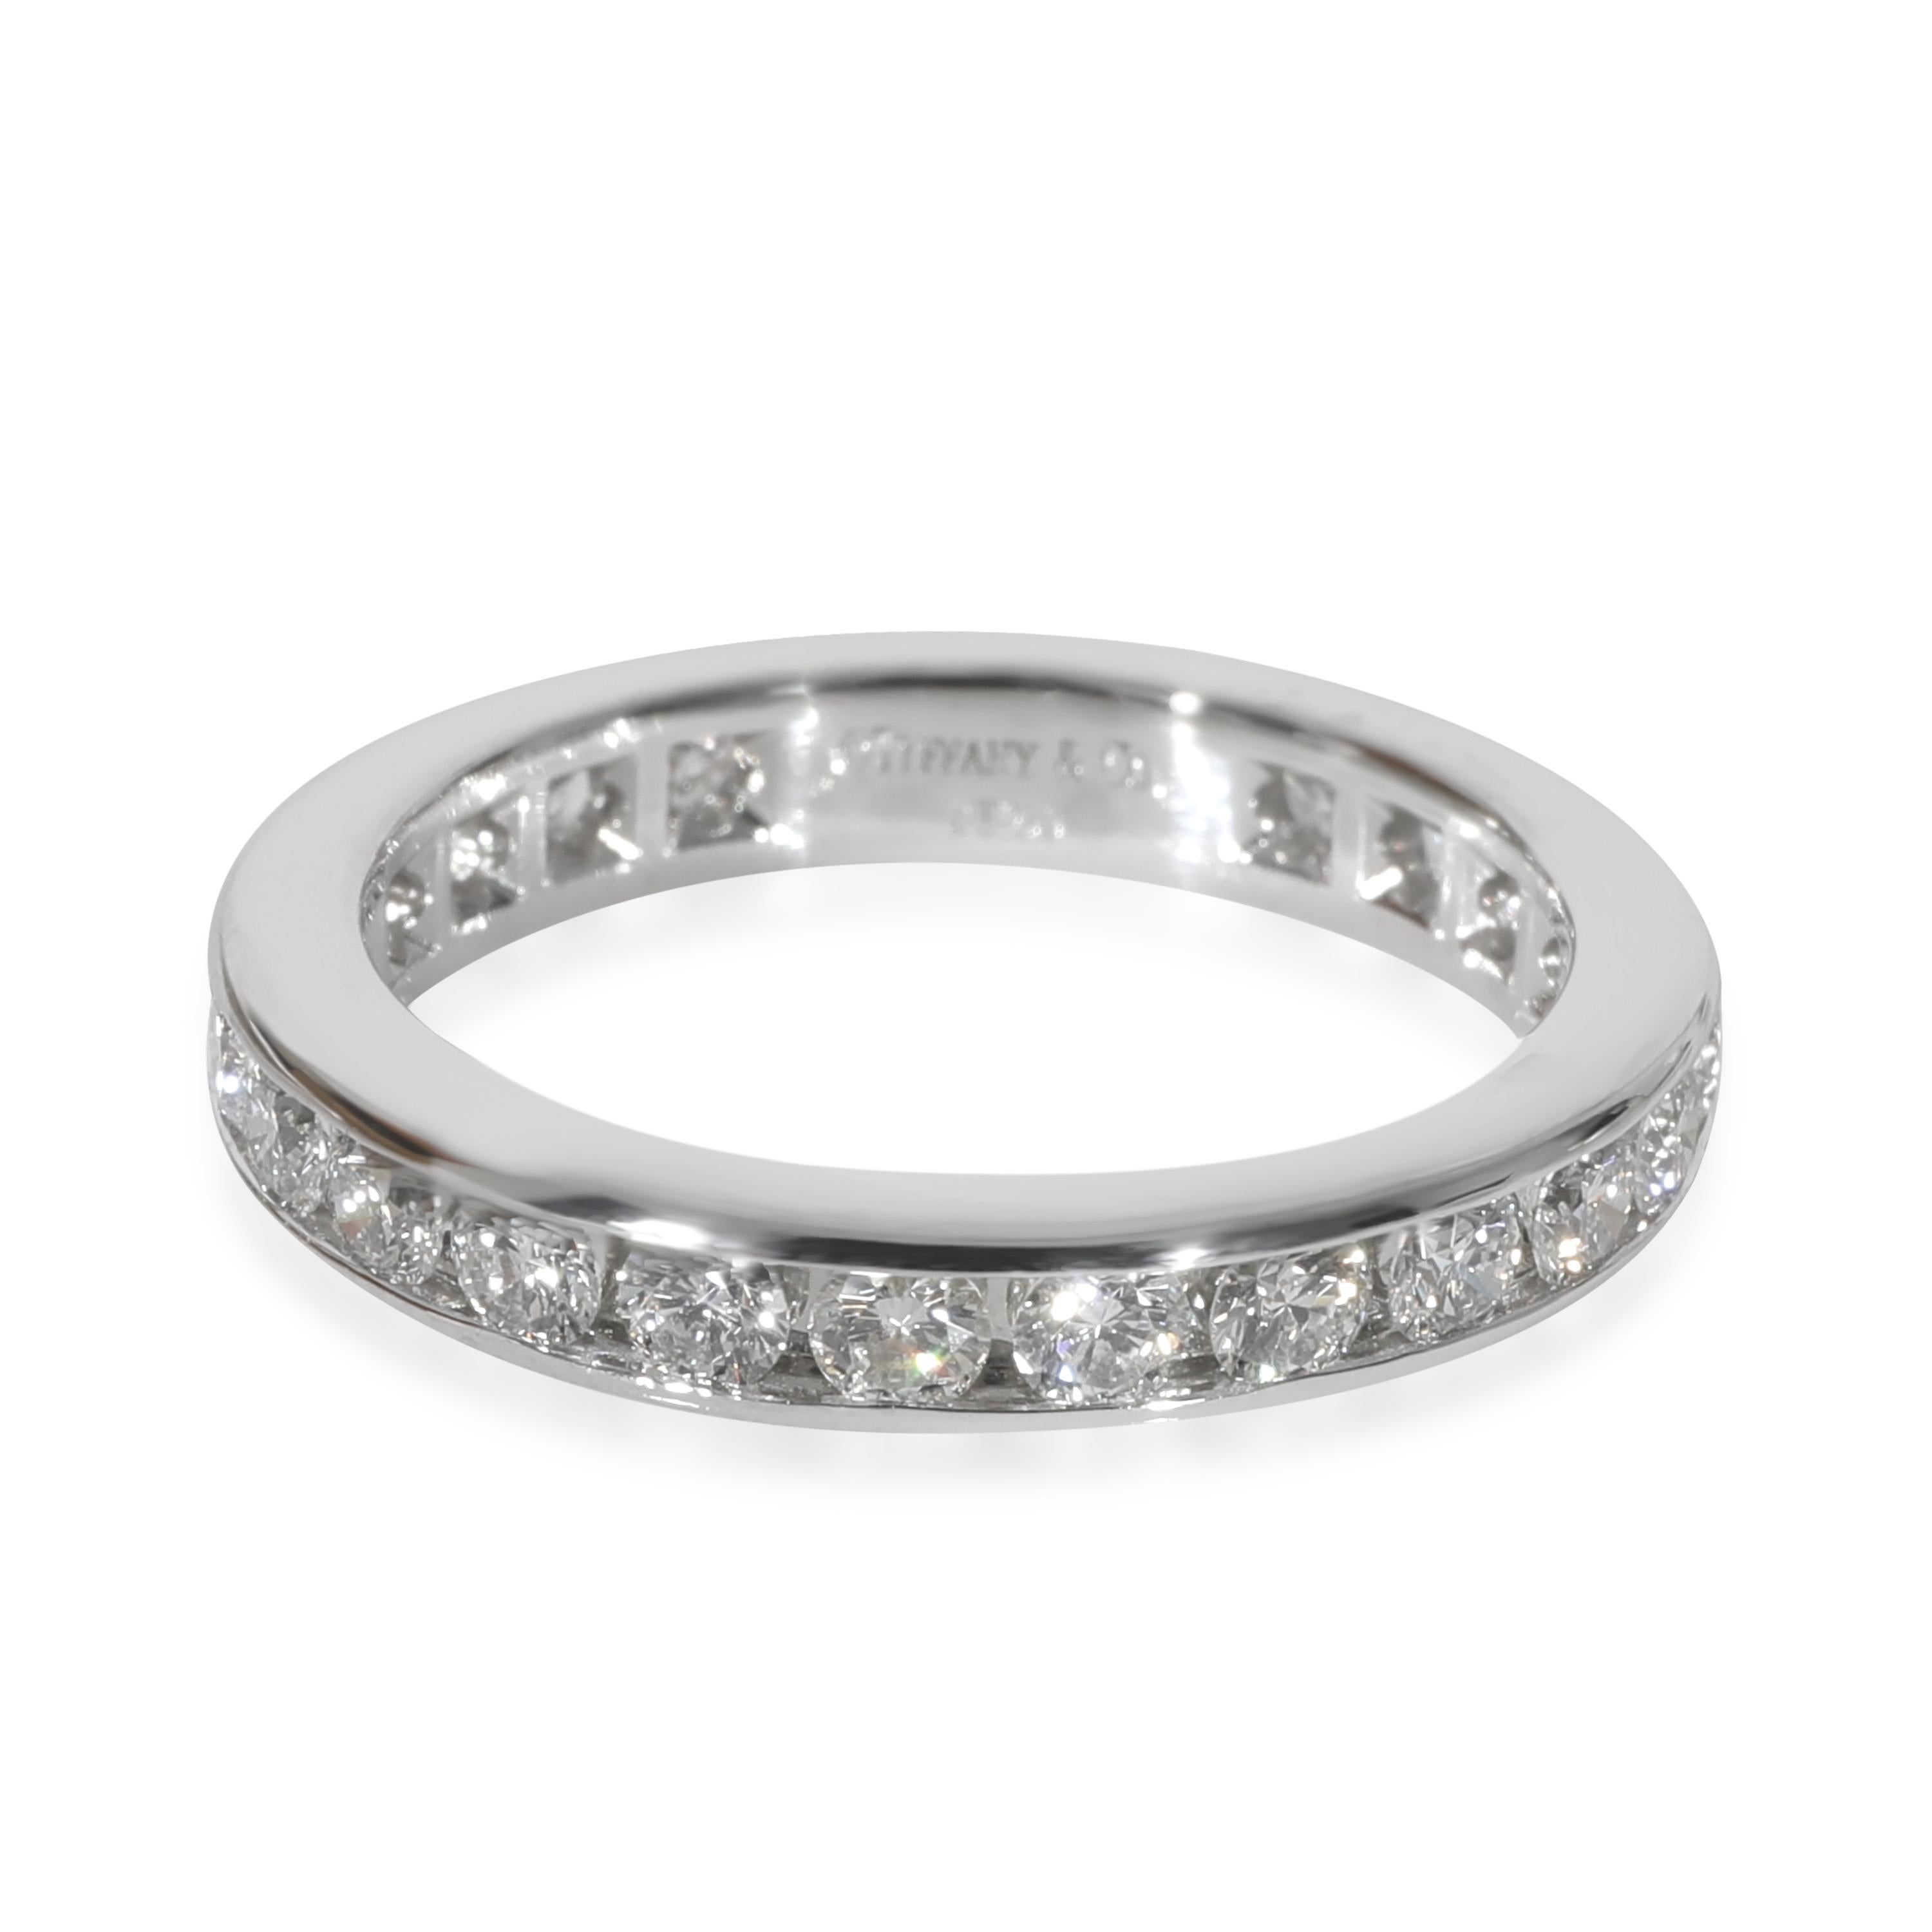 Tiffany & Co. Channel Set Diamond Eternity Band in Platinum 1.00 CTW In Excellent Condition For Sale In New York, NY